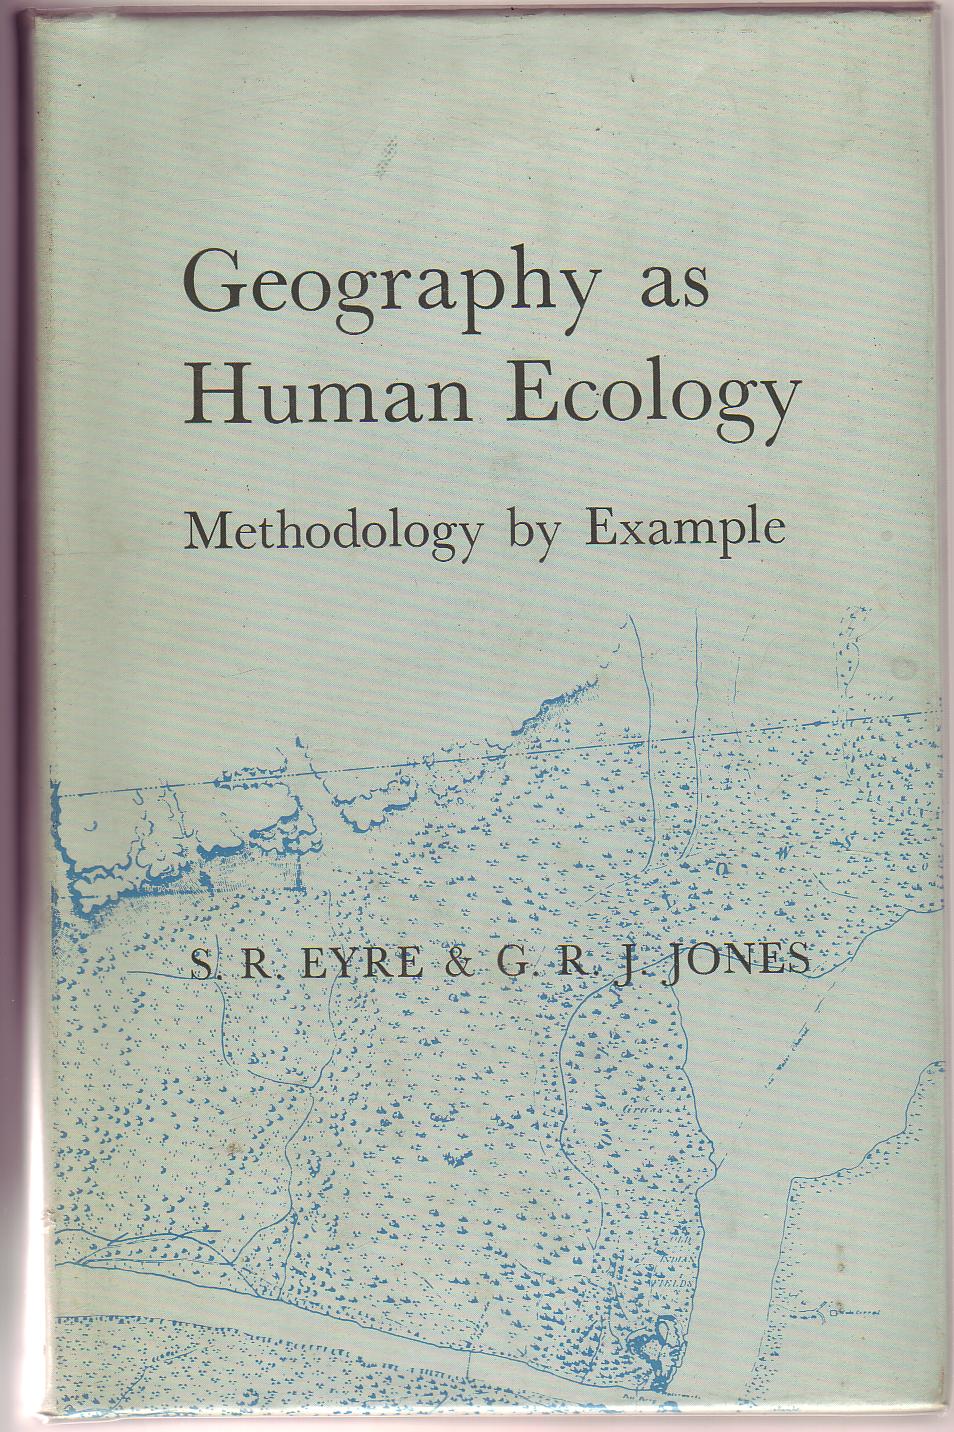 EYRE, S. R; JONES, G. R. J; Editors. - Geography as Human Ecology. Methodology by Example.